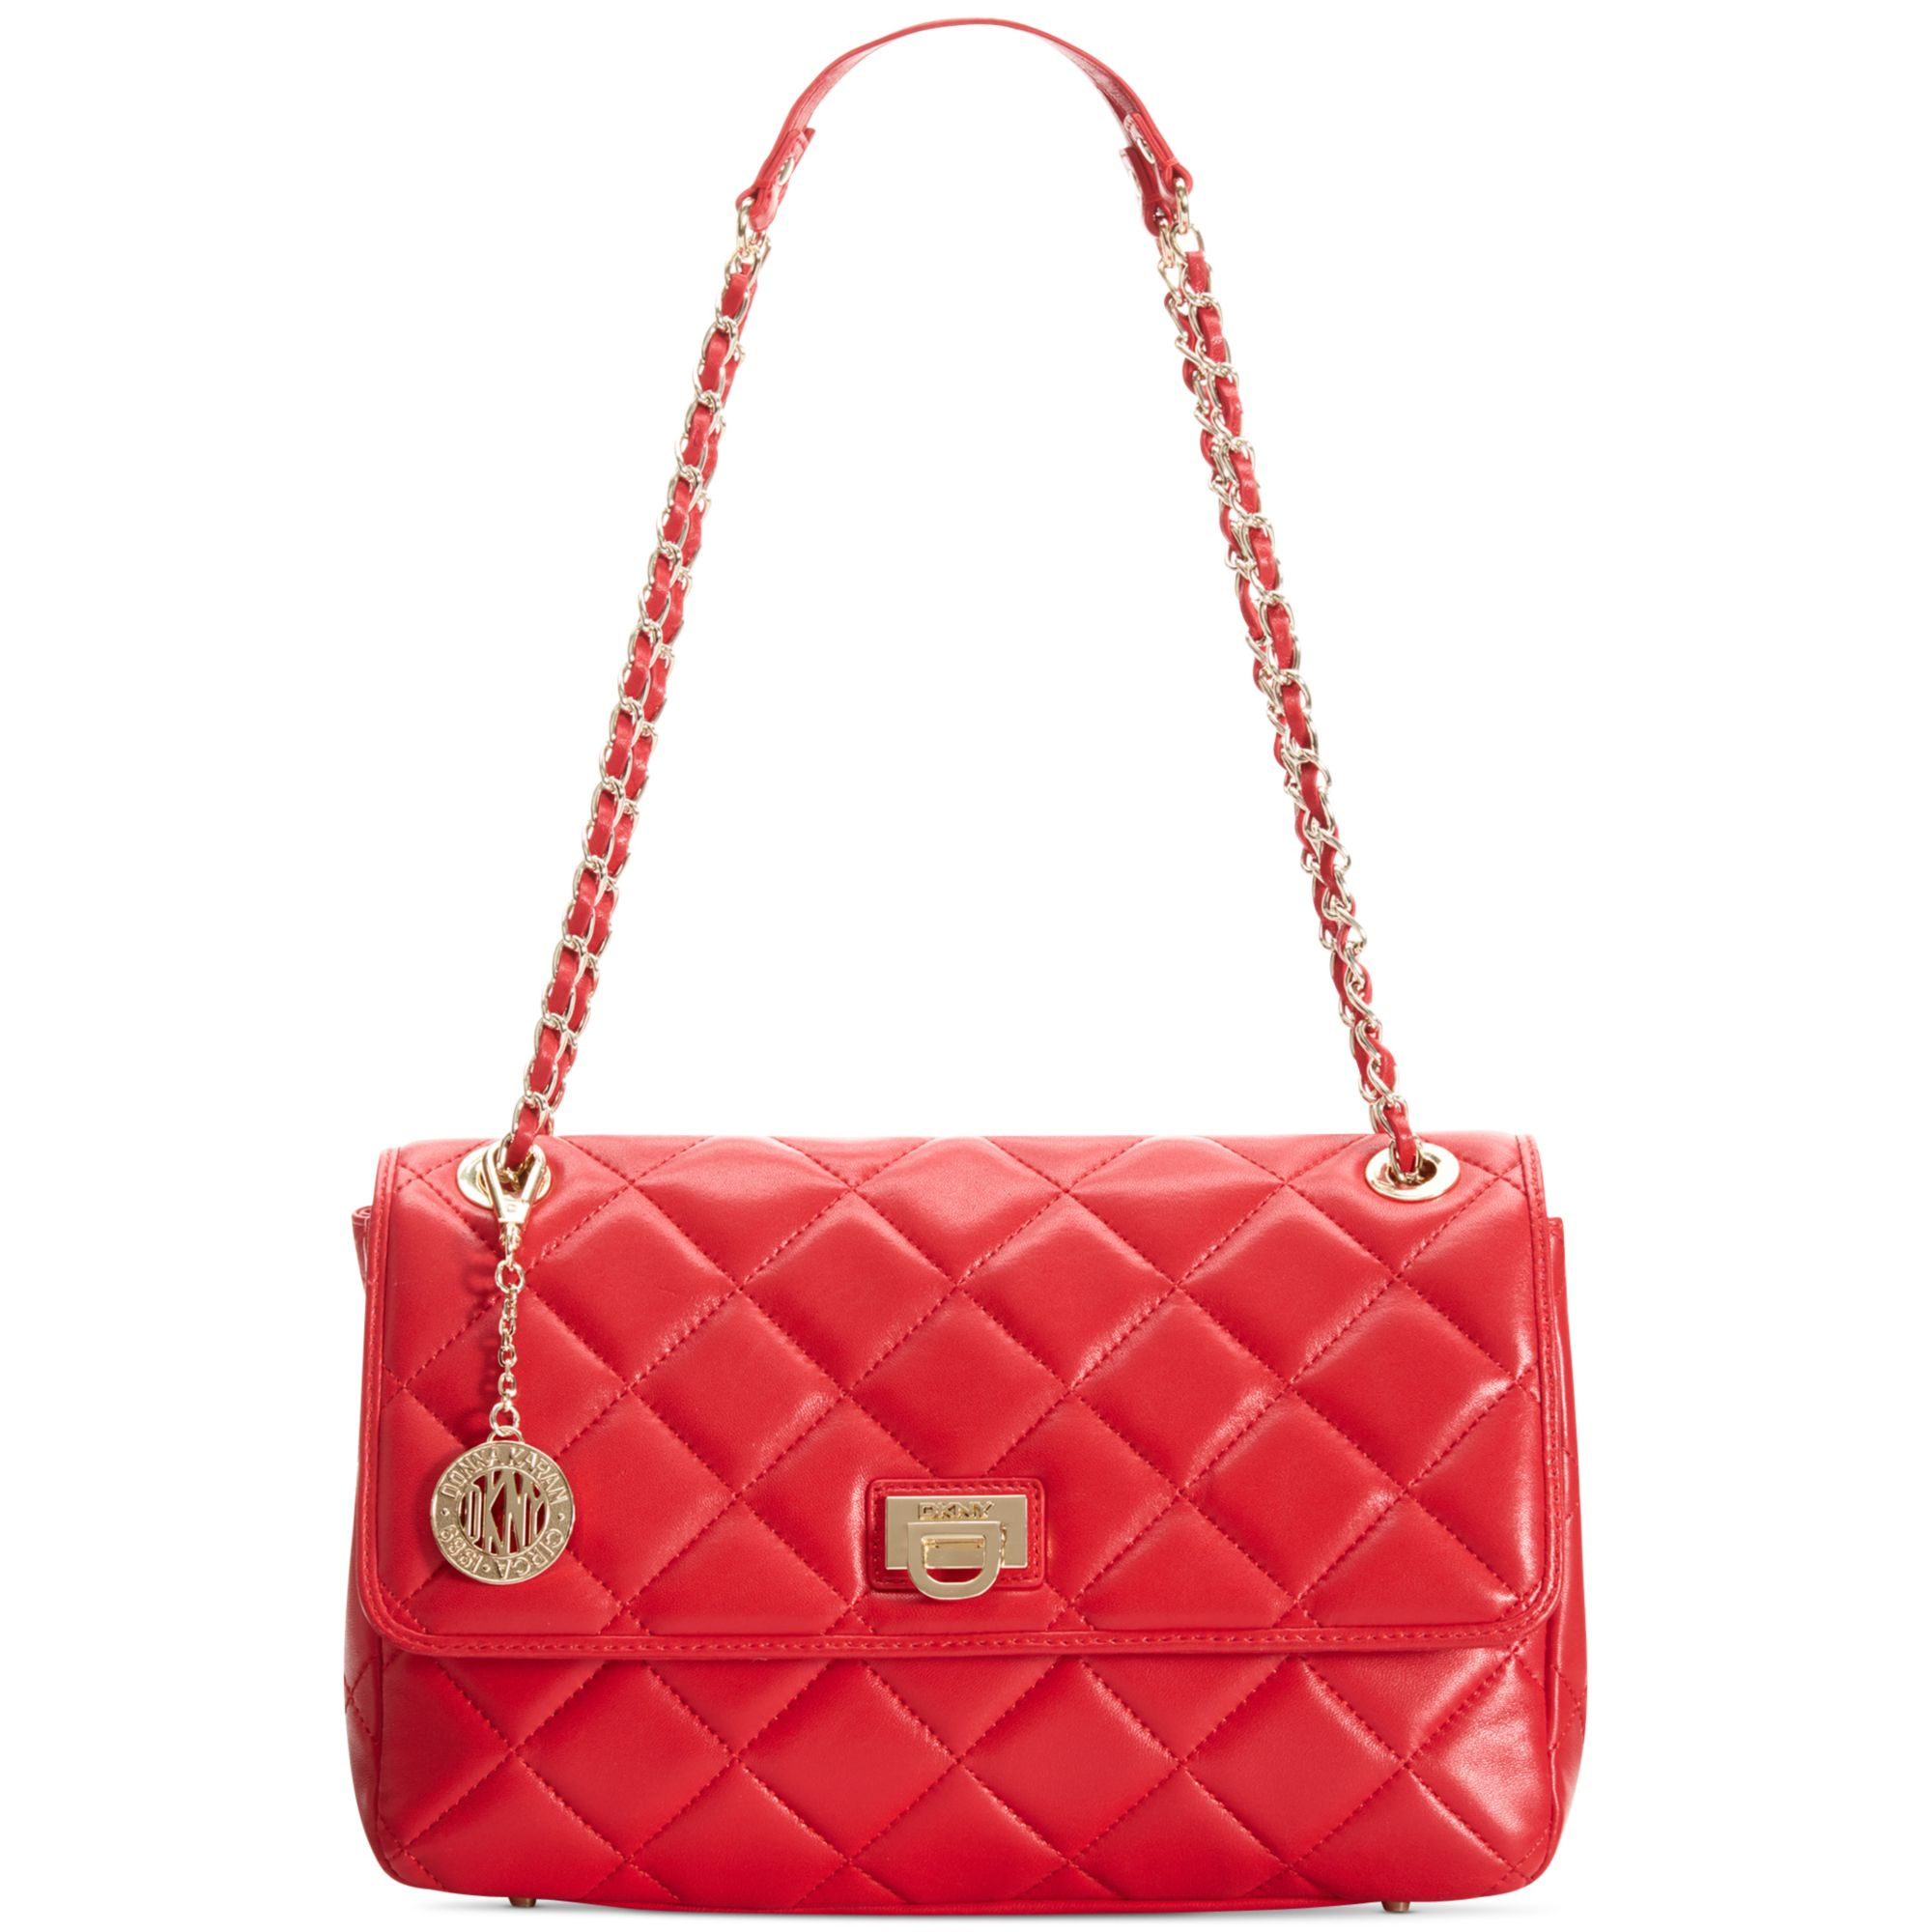 Lyst - Dkny Gansevoort Quilted Nappa Shoulder Bag in Red